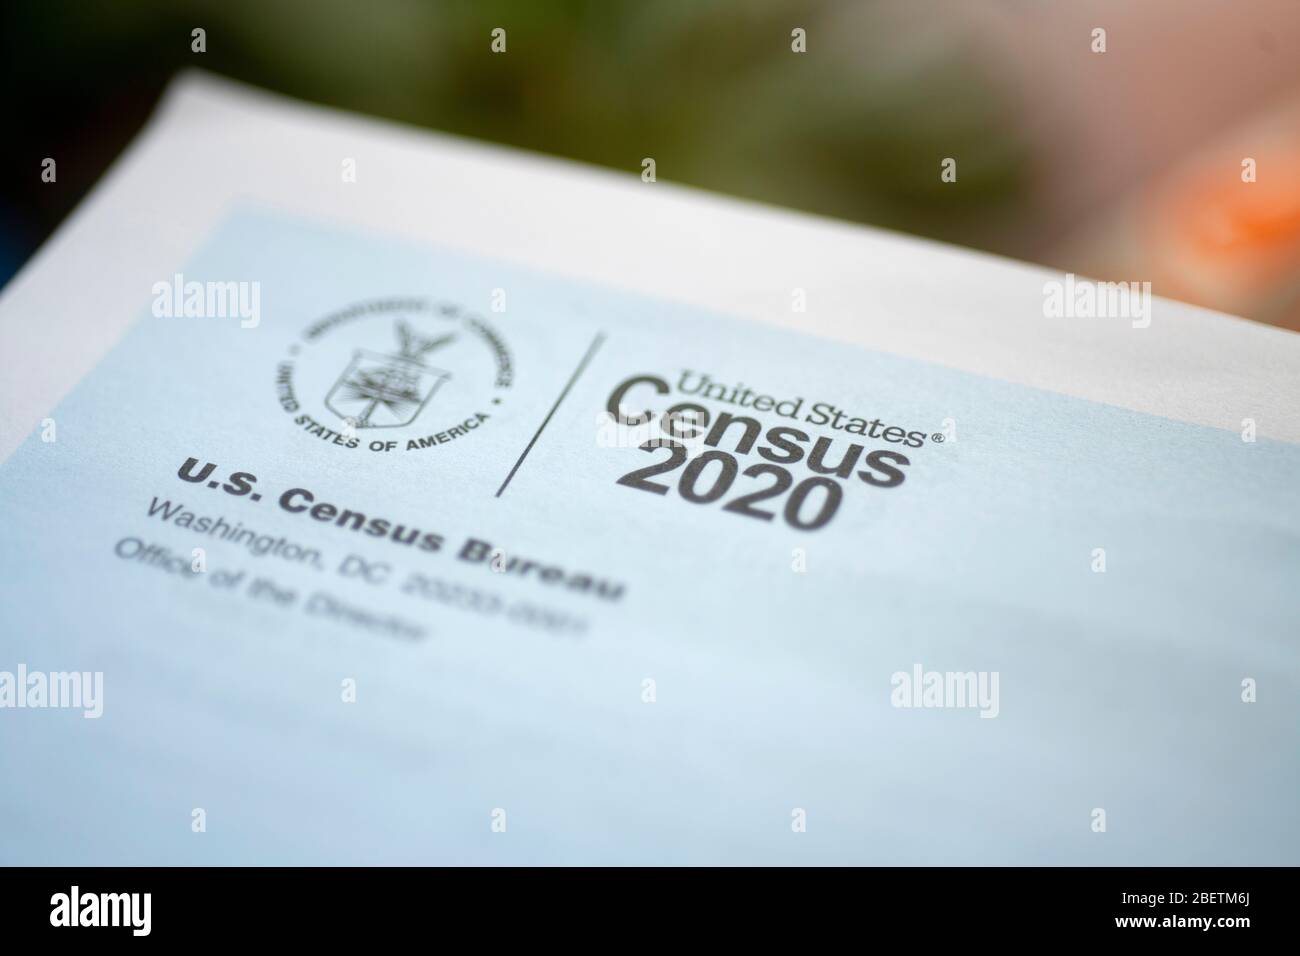 USA Census 2020 mailing asking people to go online to fill out survery Stock Photo